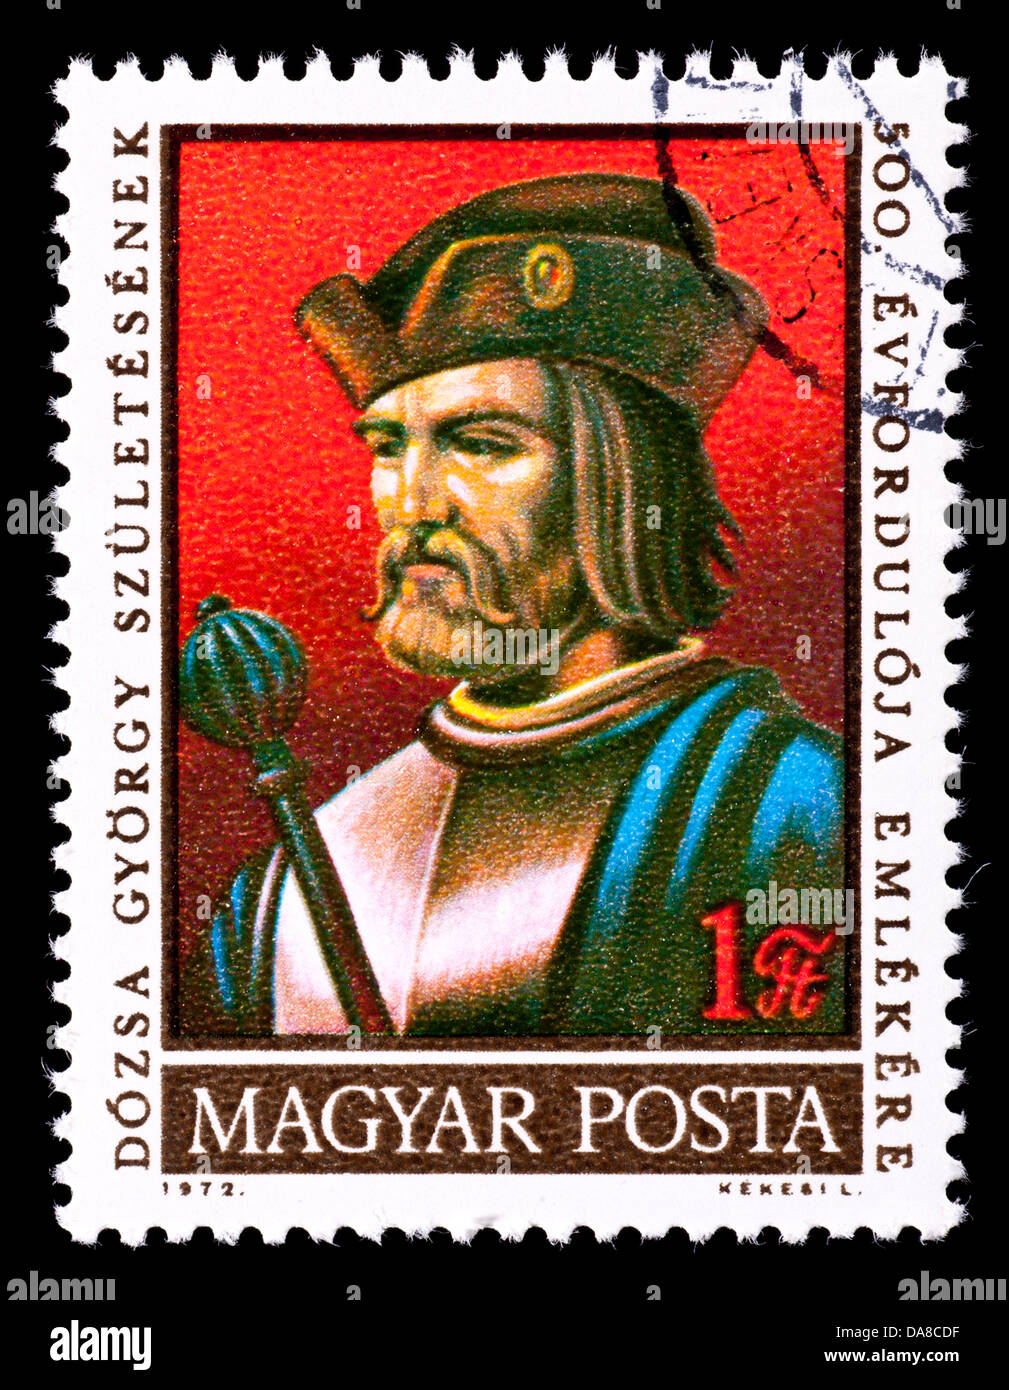 Postage stamp from Hungary depicting Gyorgy Dozsa. Stock Photo